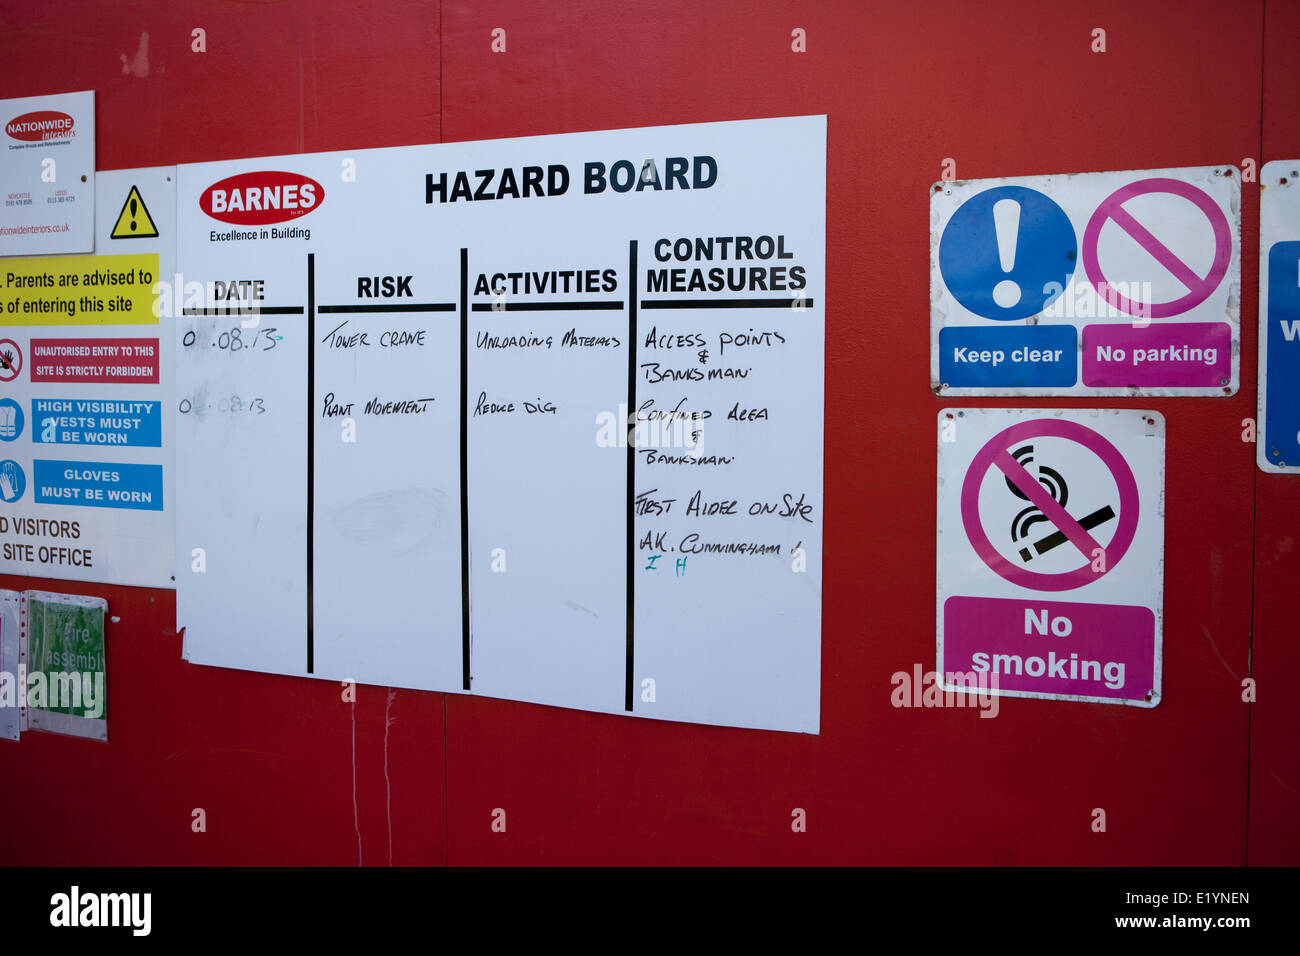 Hazard Board Outside Construction Site Listing Risk Factors And Control